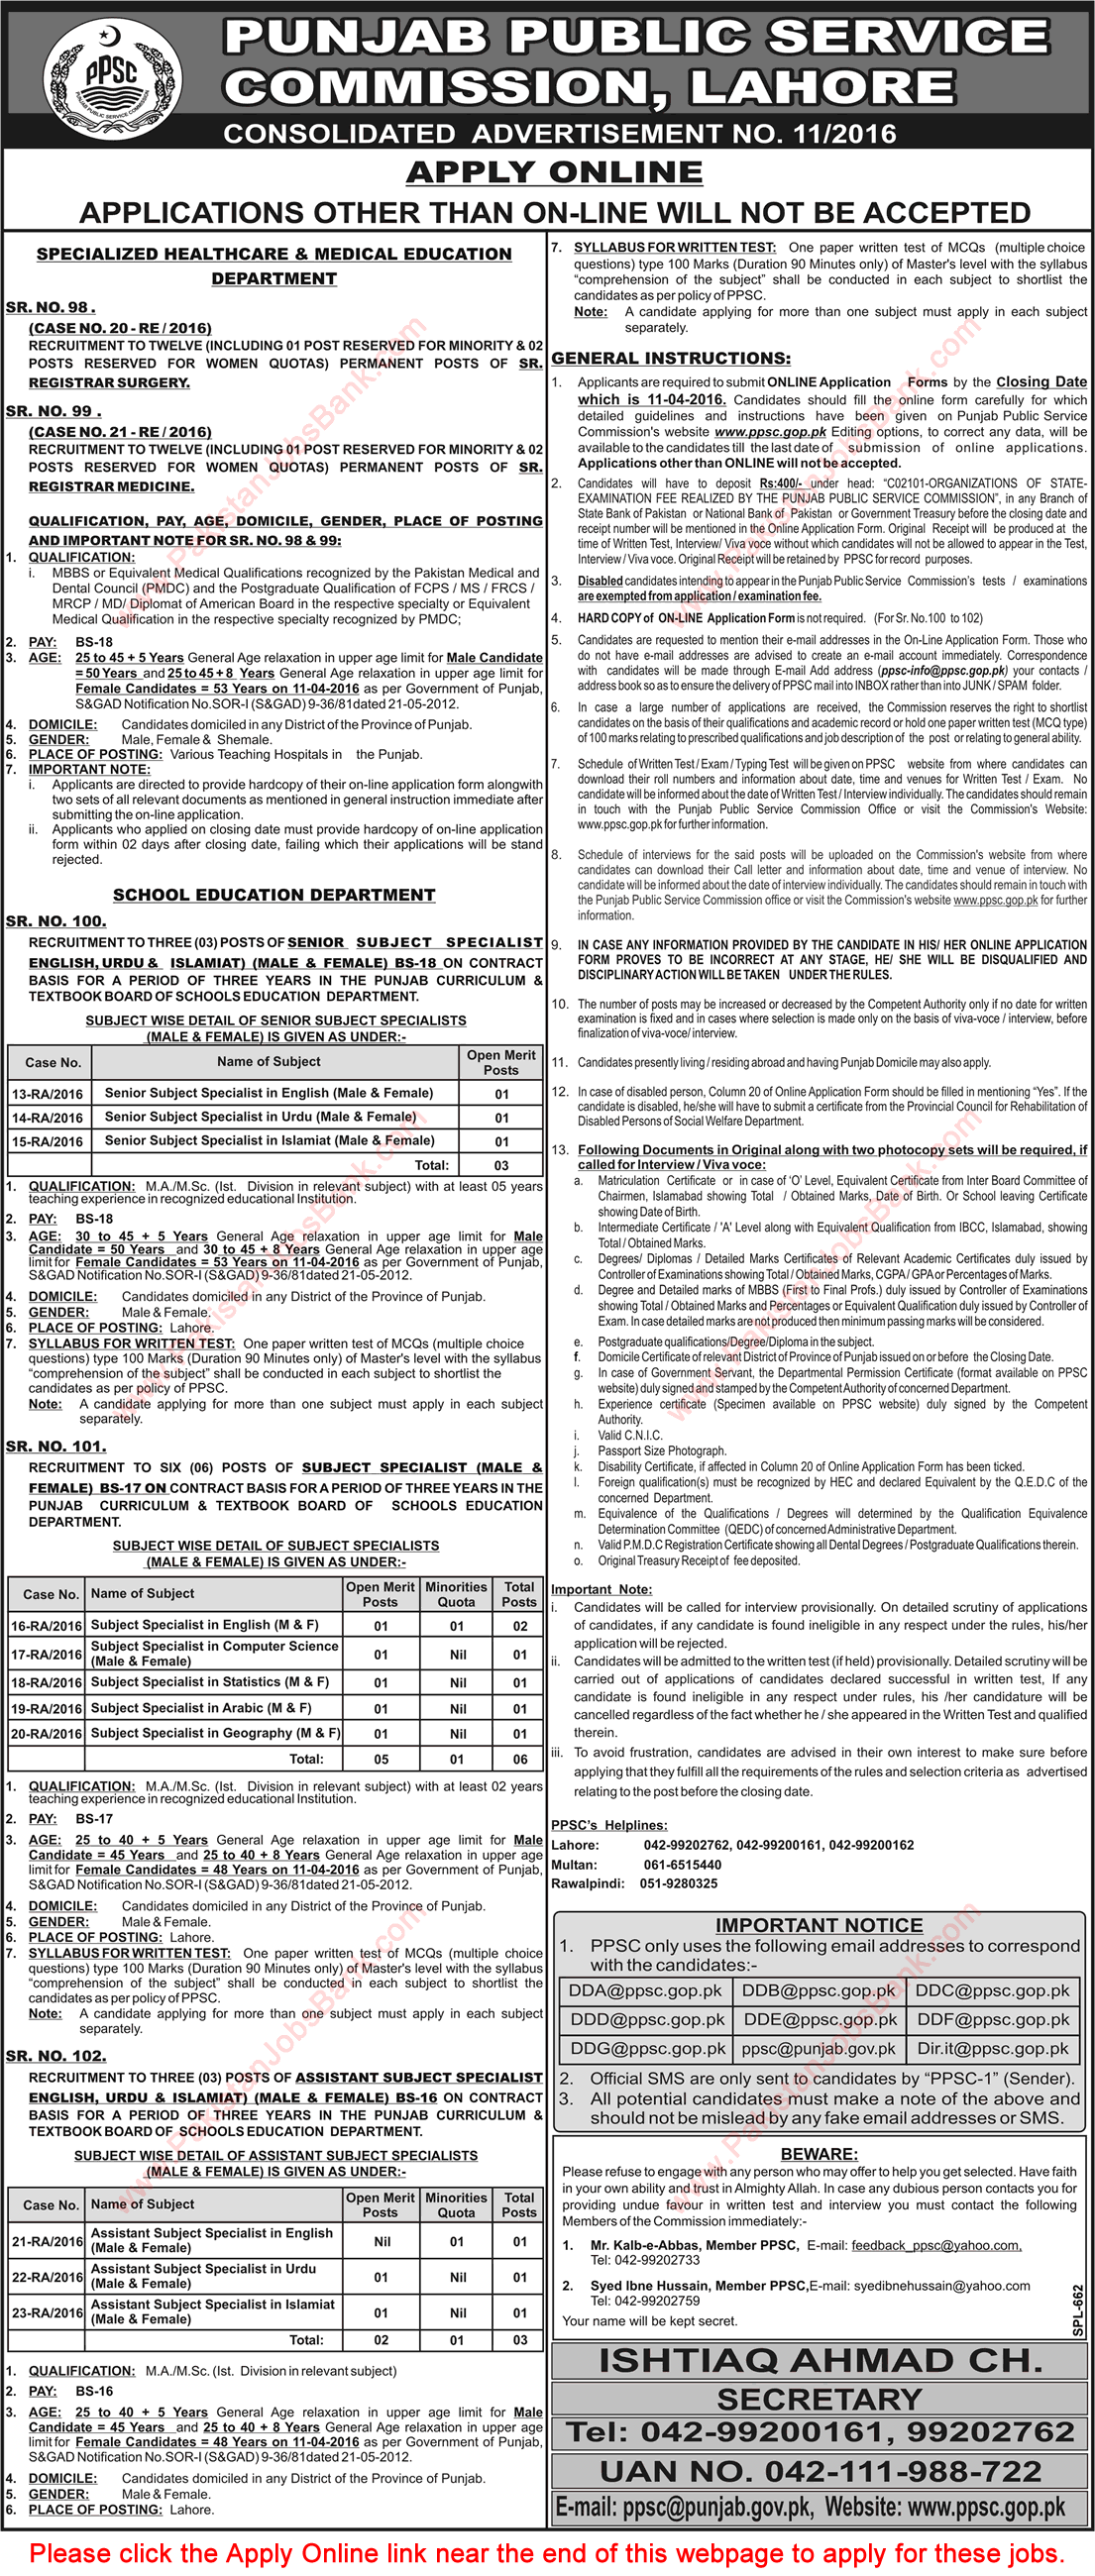 PPSC Jobs March 2016 April Consolidated Advertisement No 11/2016 Apply Online Latest